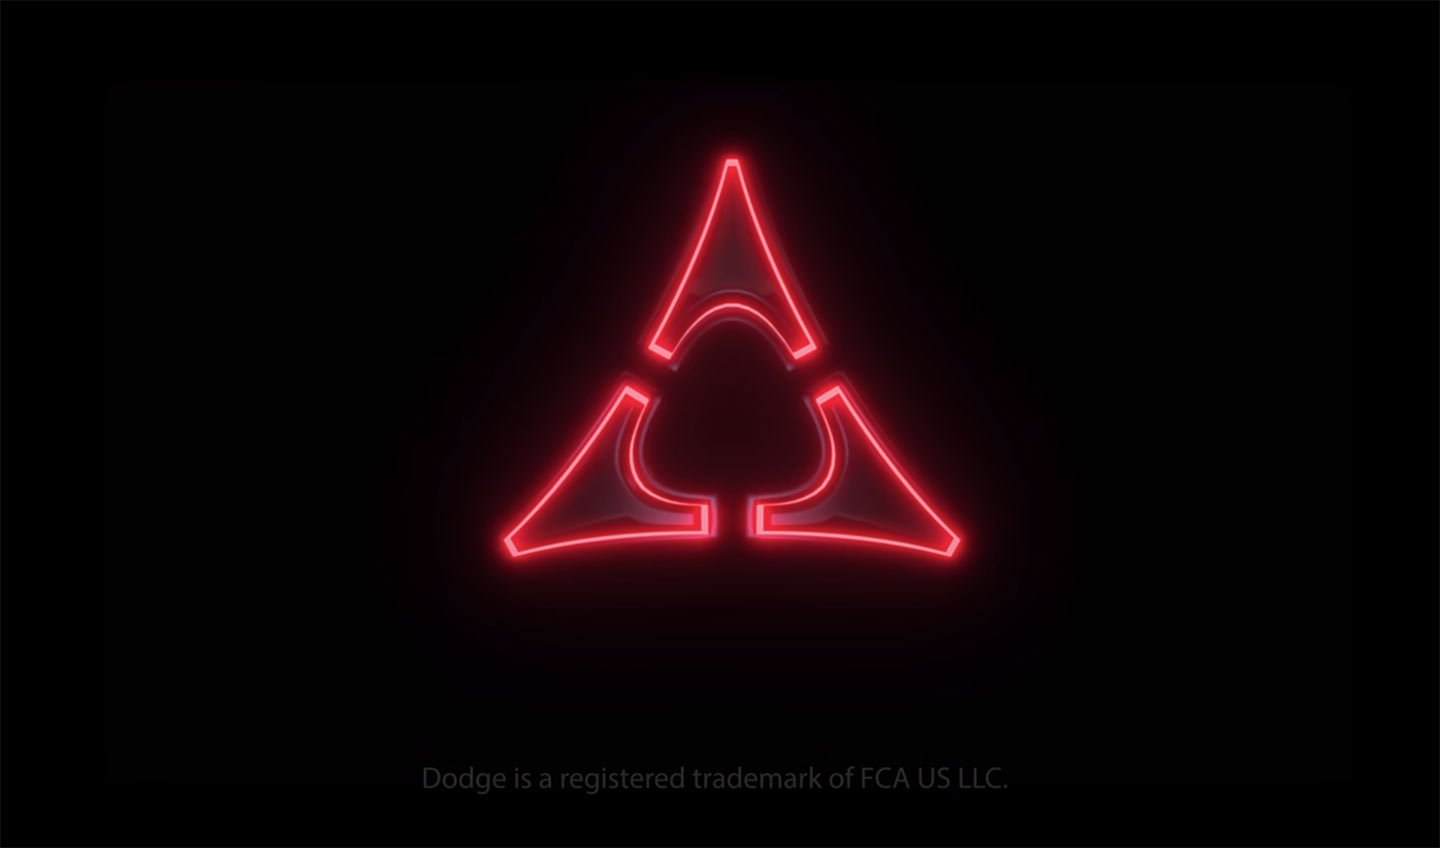 Glowing Fratzog Logo from Dodge Electric Concept Car Teaser